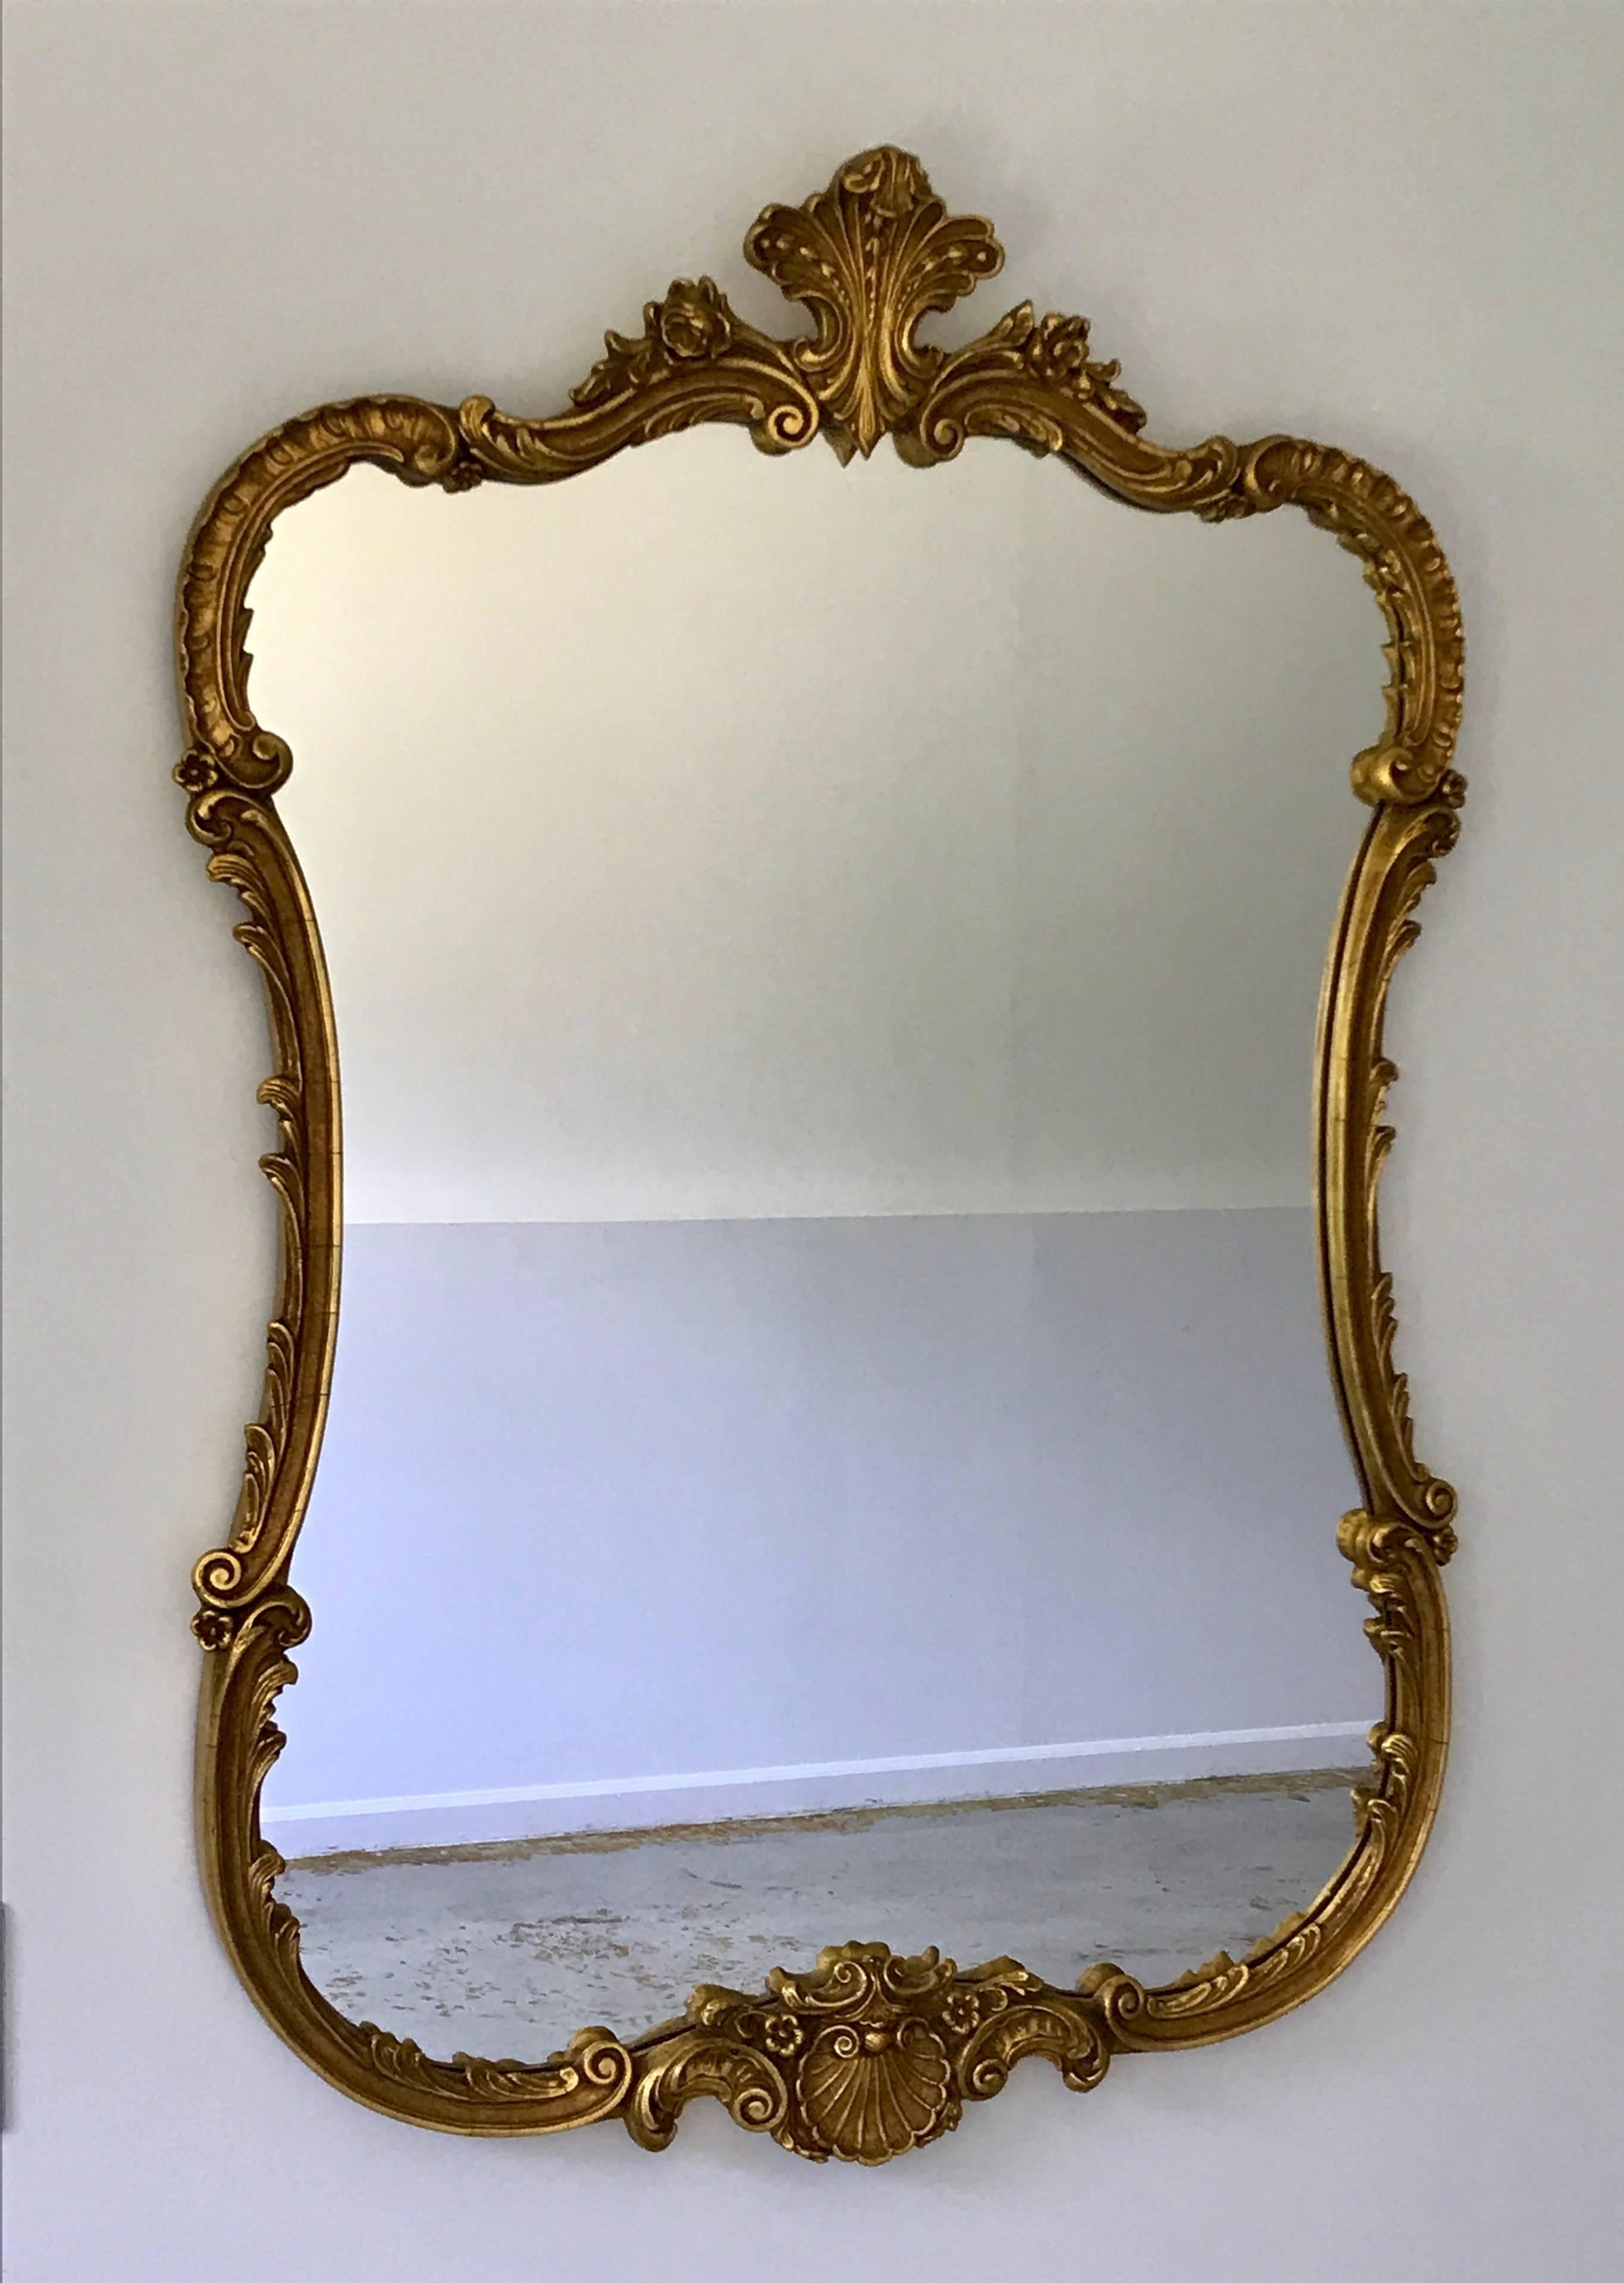 Beautiful Hollywood Regency Baroque style giltwood mirror with simple elegant details.